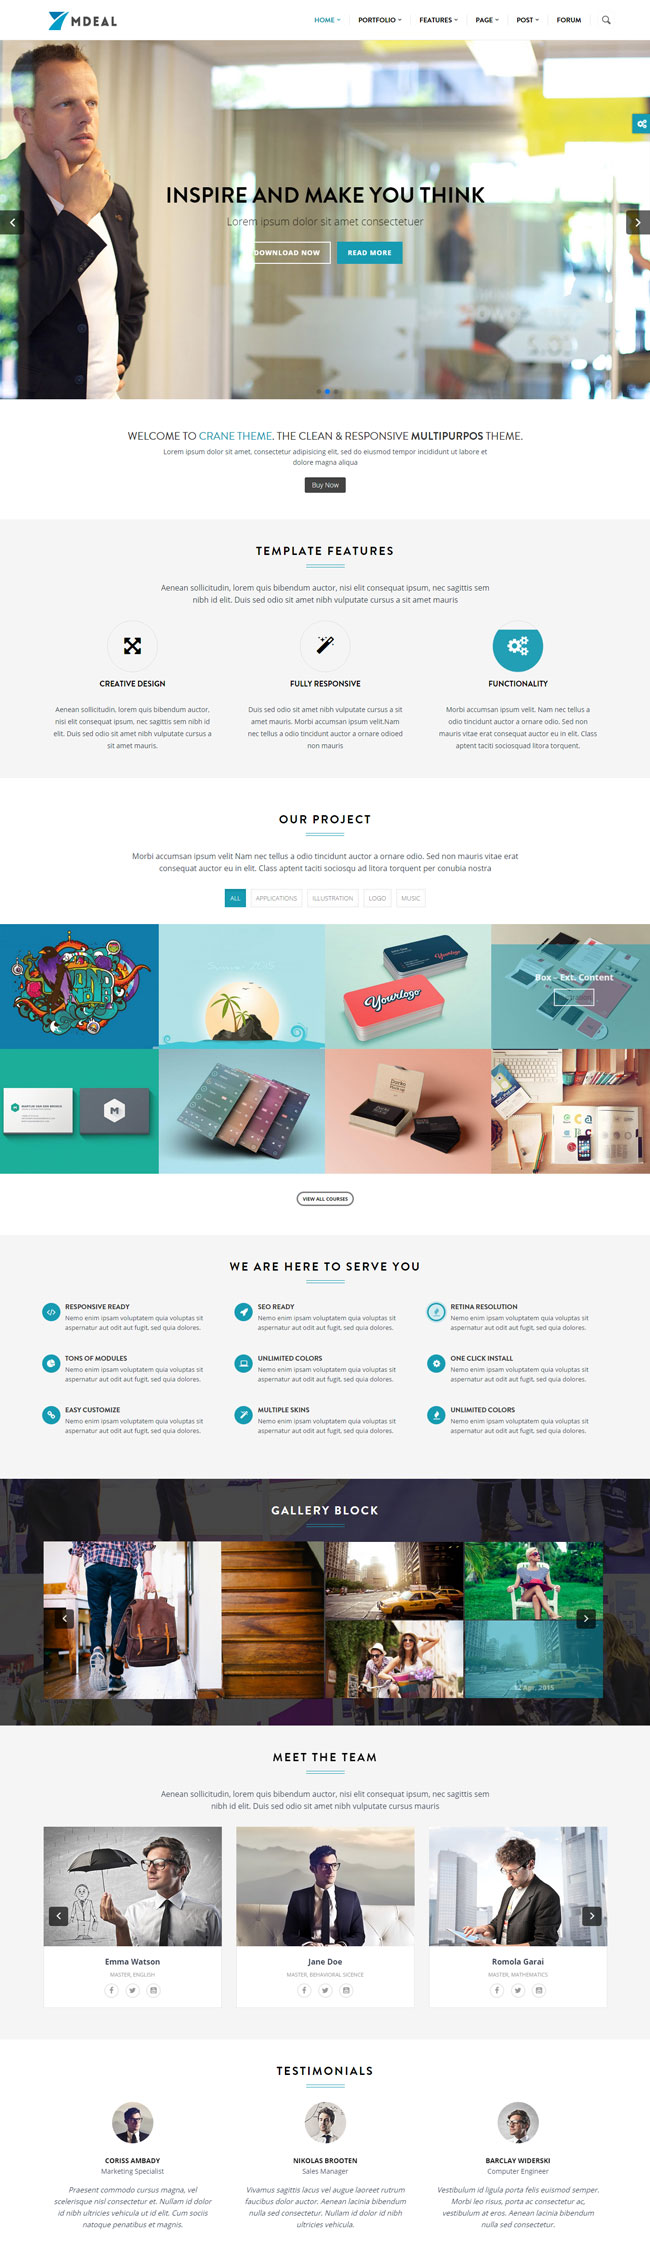 Mdeal-Responsive-Business-Drupal-Theme